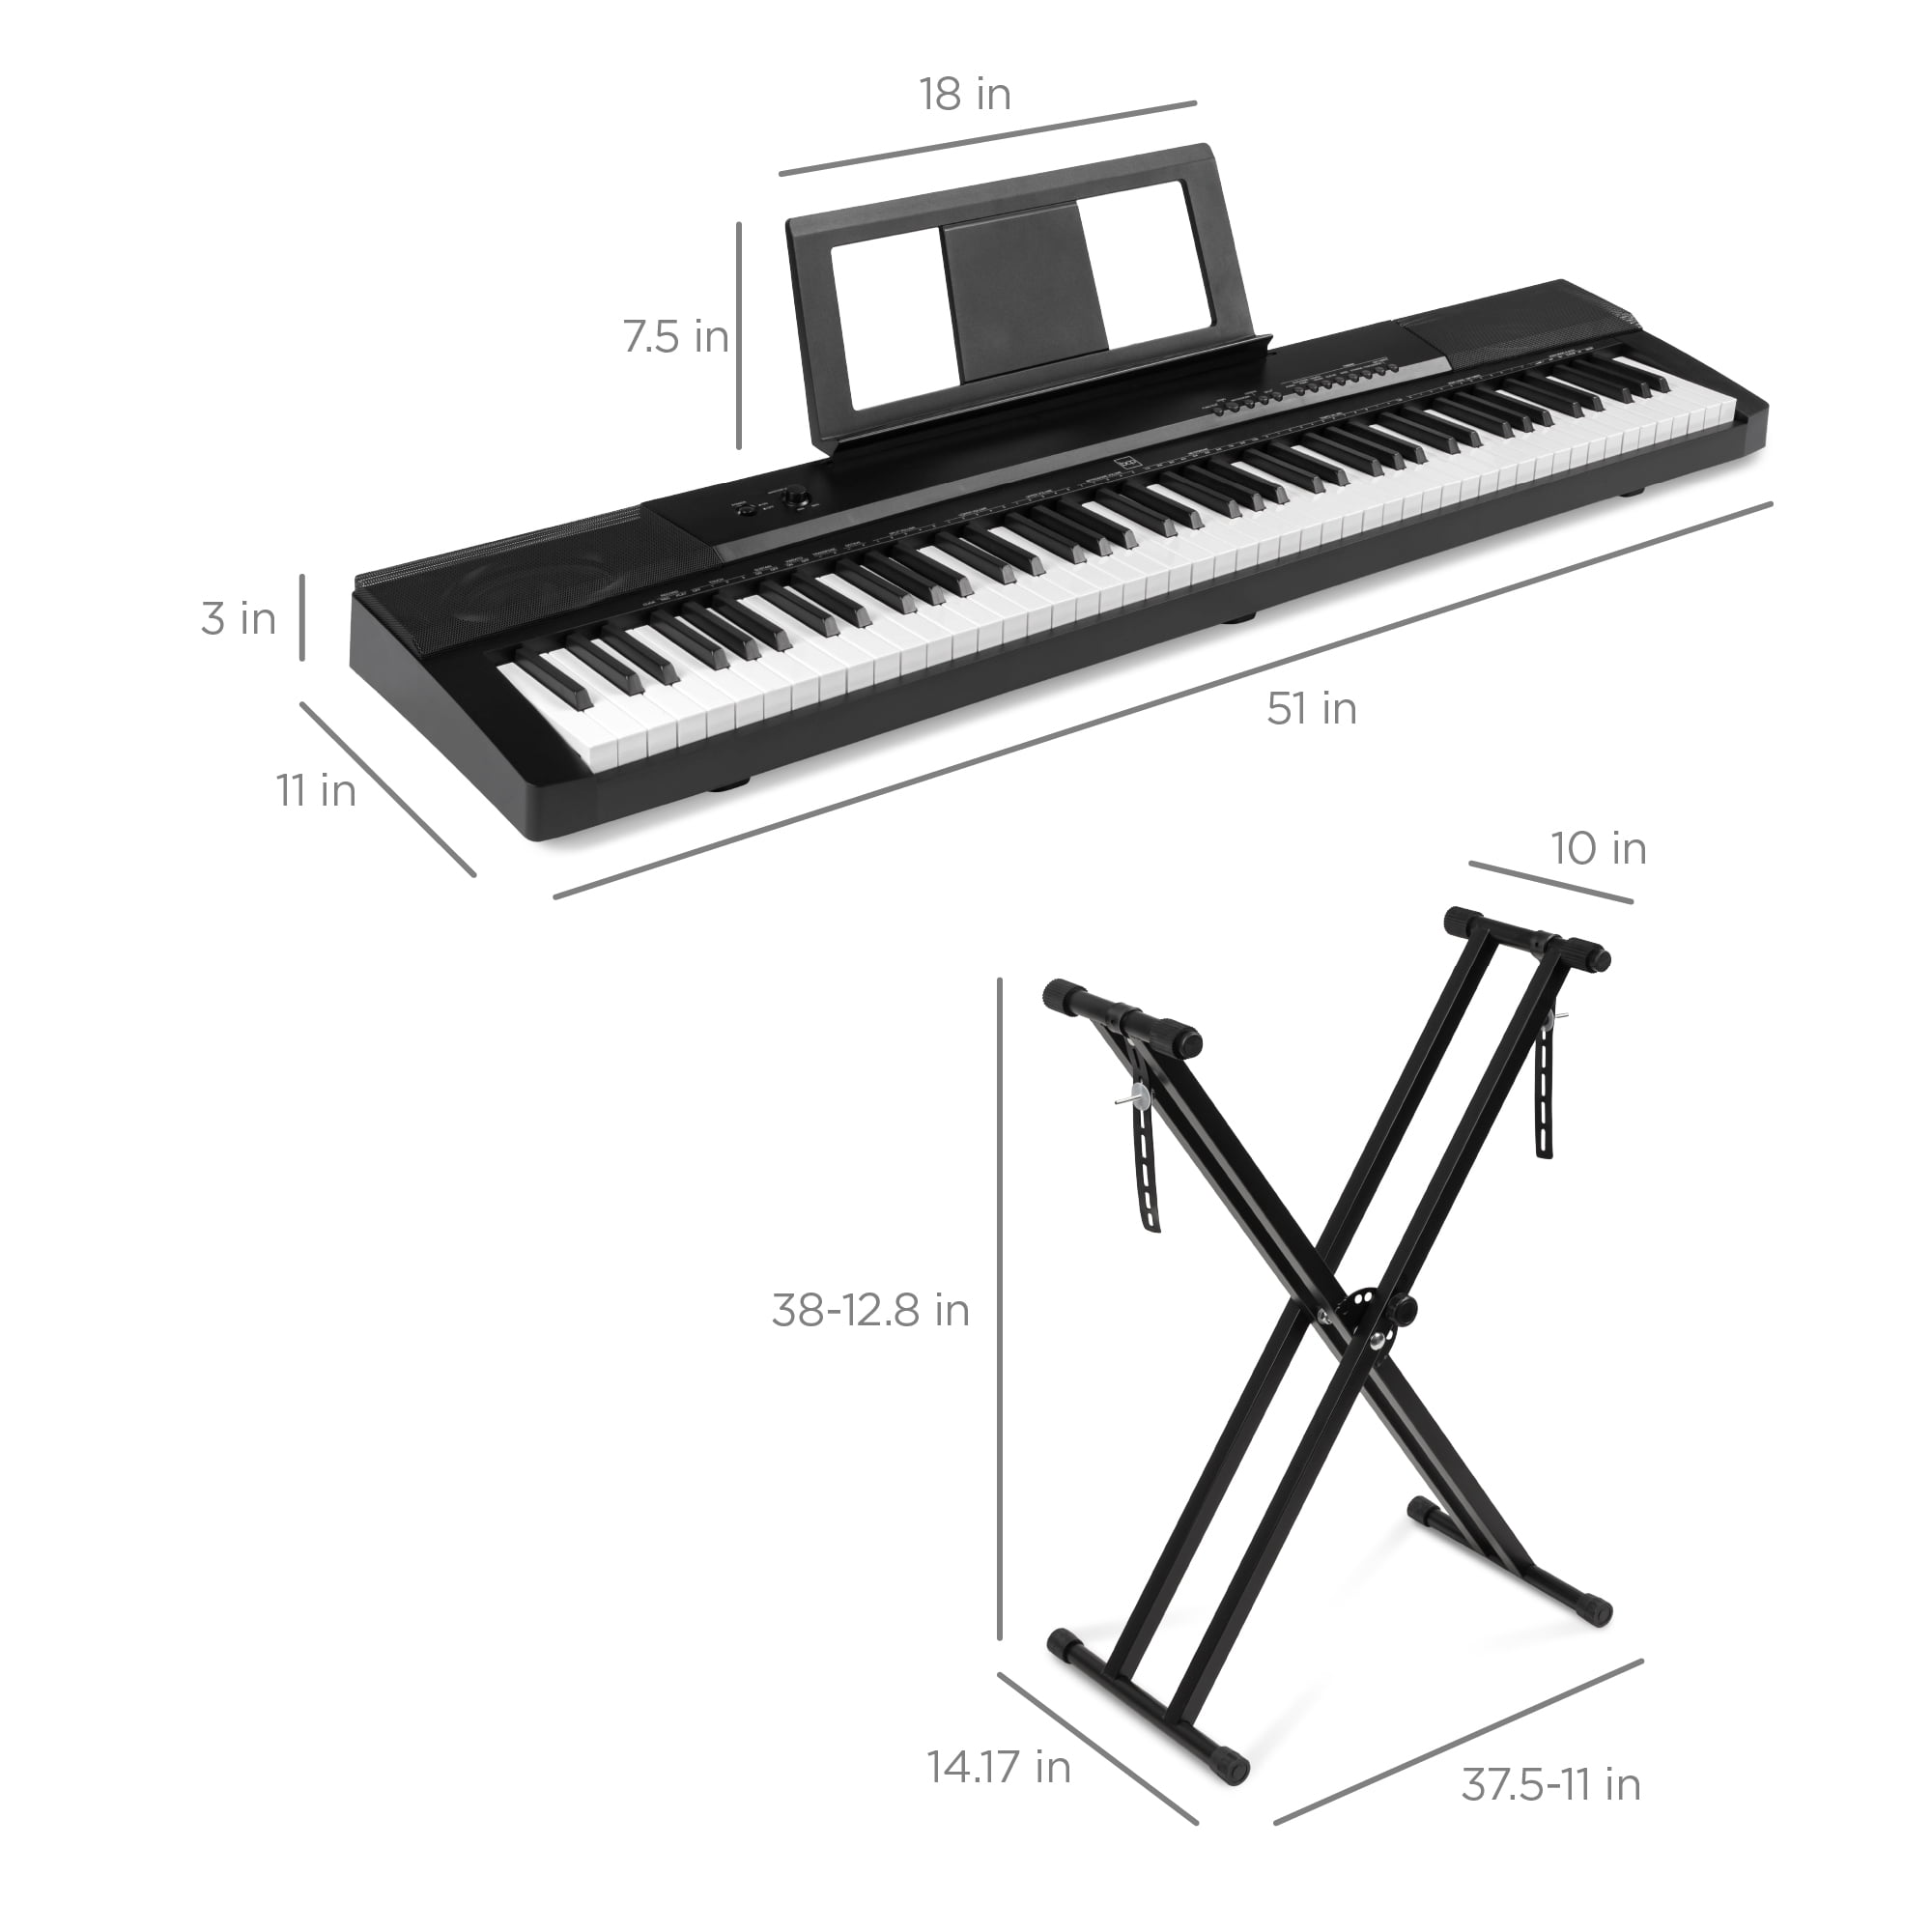 Best Choice Products 88-Key Full Size Digital Piano Electronic Keyboard Set  for All Experience Levels w/Semi-Weighted Keys, Stand, Sustain Pedal